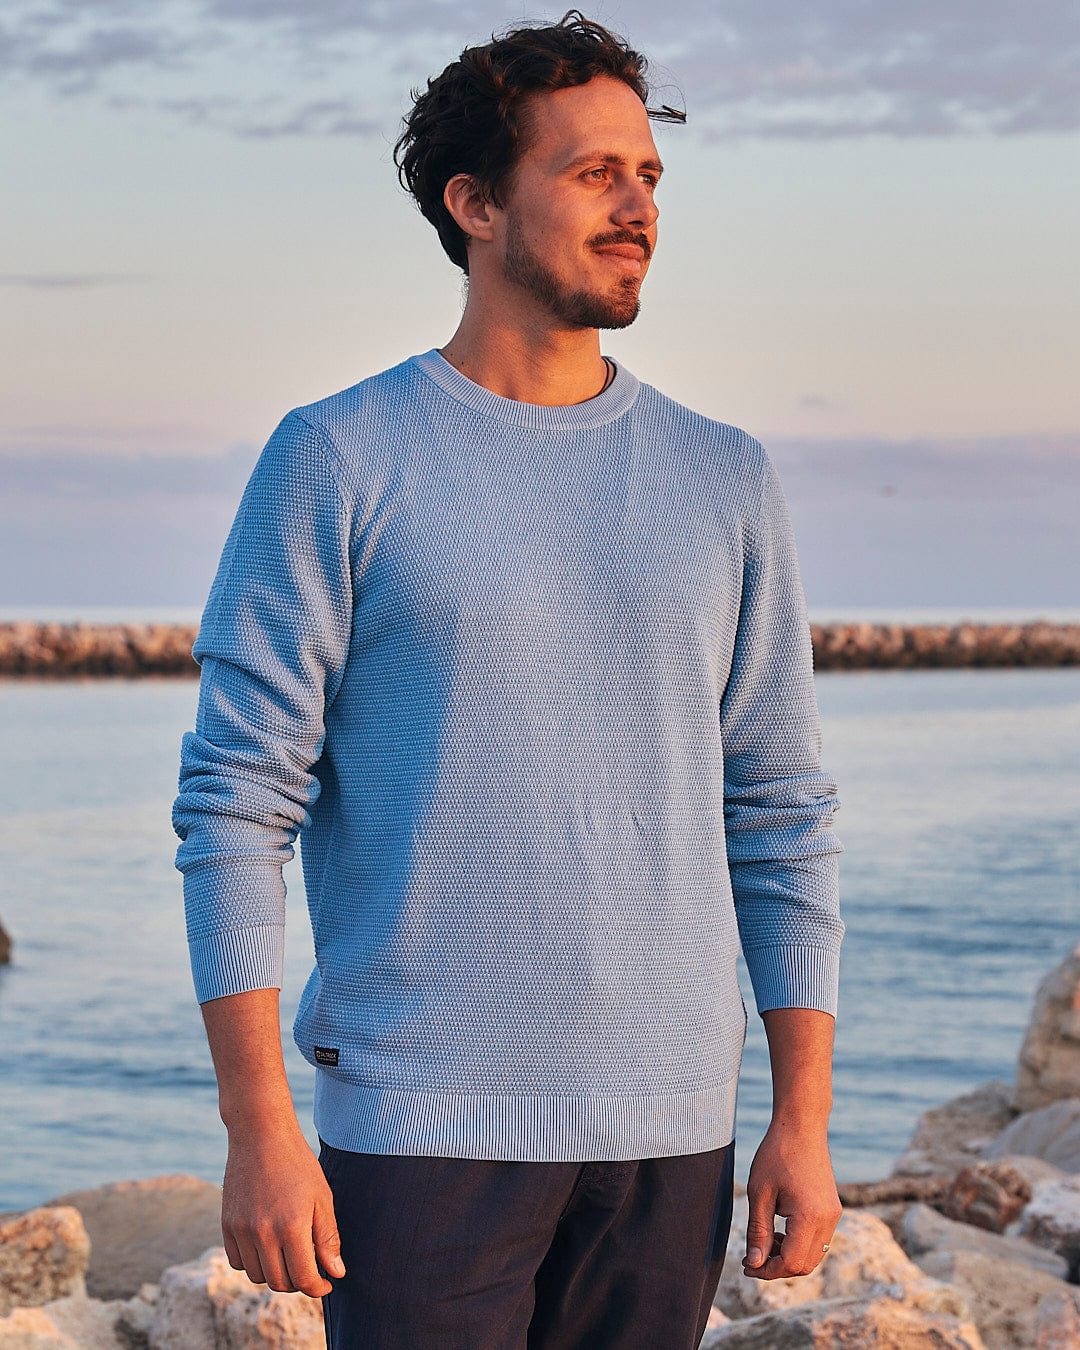 A man in a Saltrock - Moss - Mens Washed Knitted Crew - Light Blue sweater standing by the ocean.